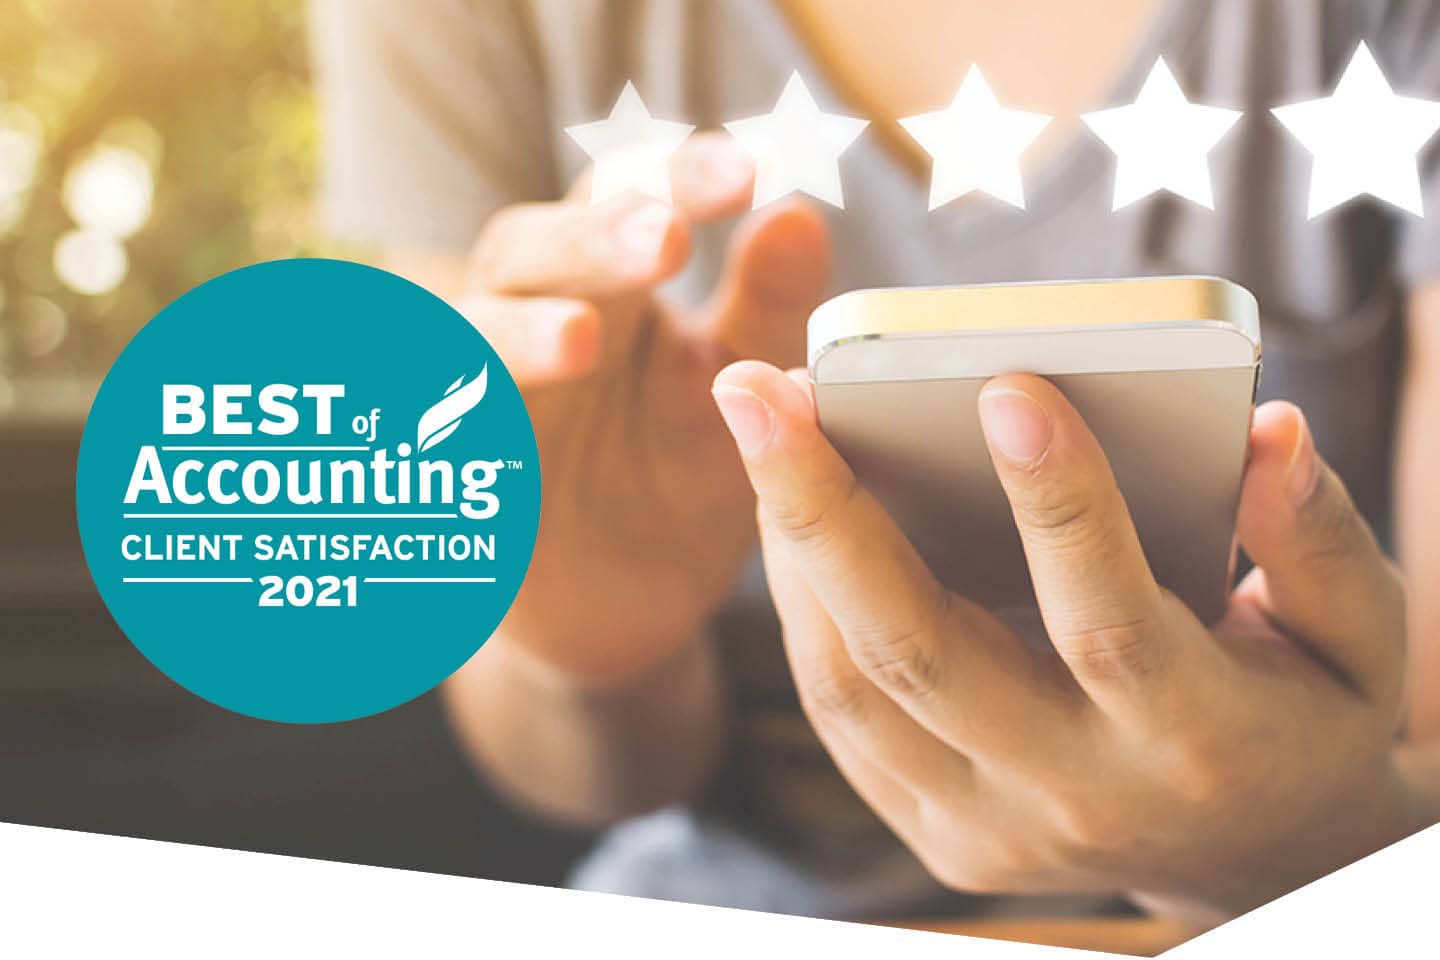 BMF Receives 2021 Best of Accounting Award for Client Service Excellence